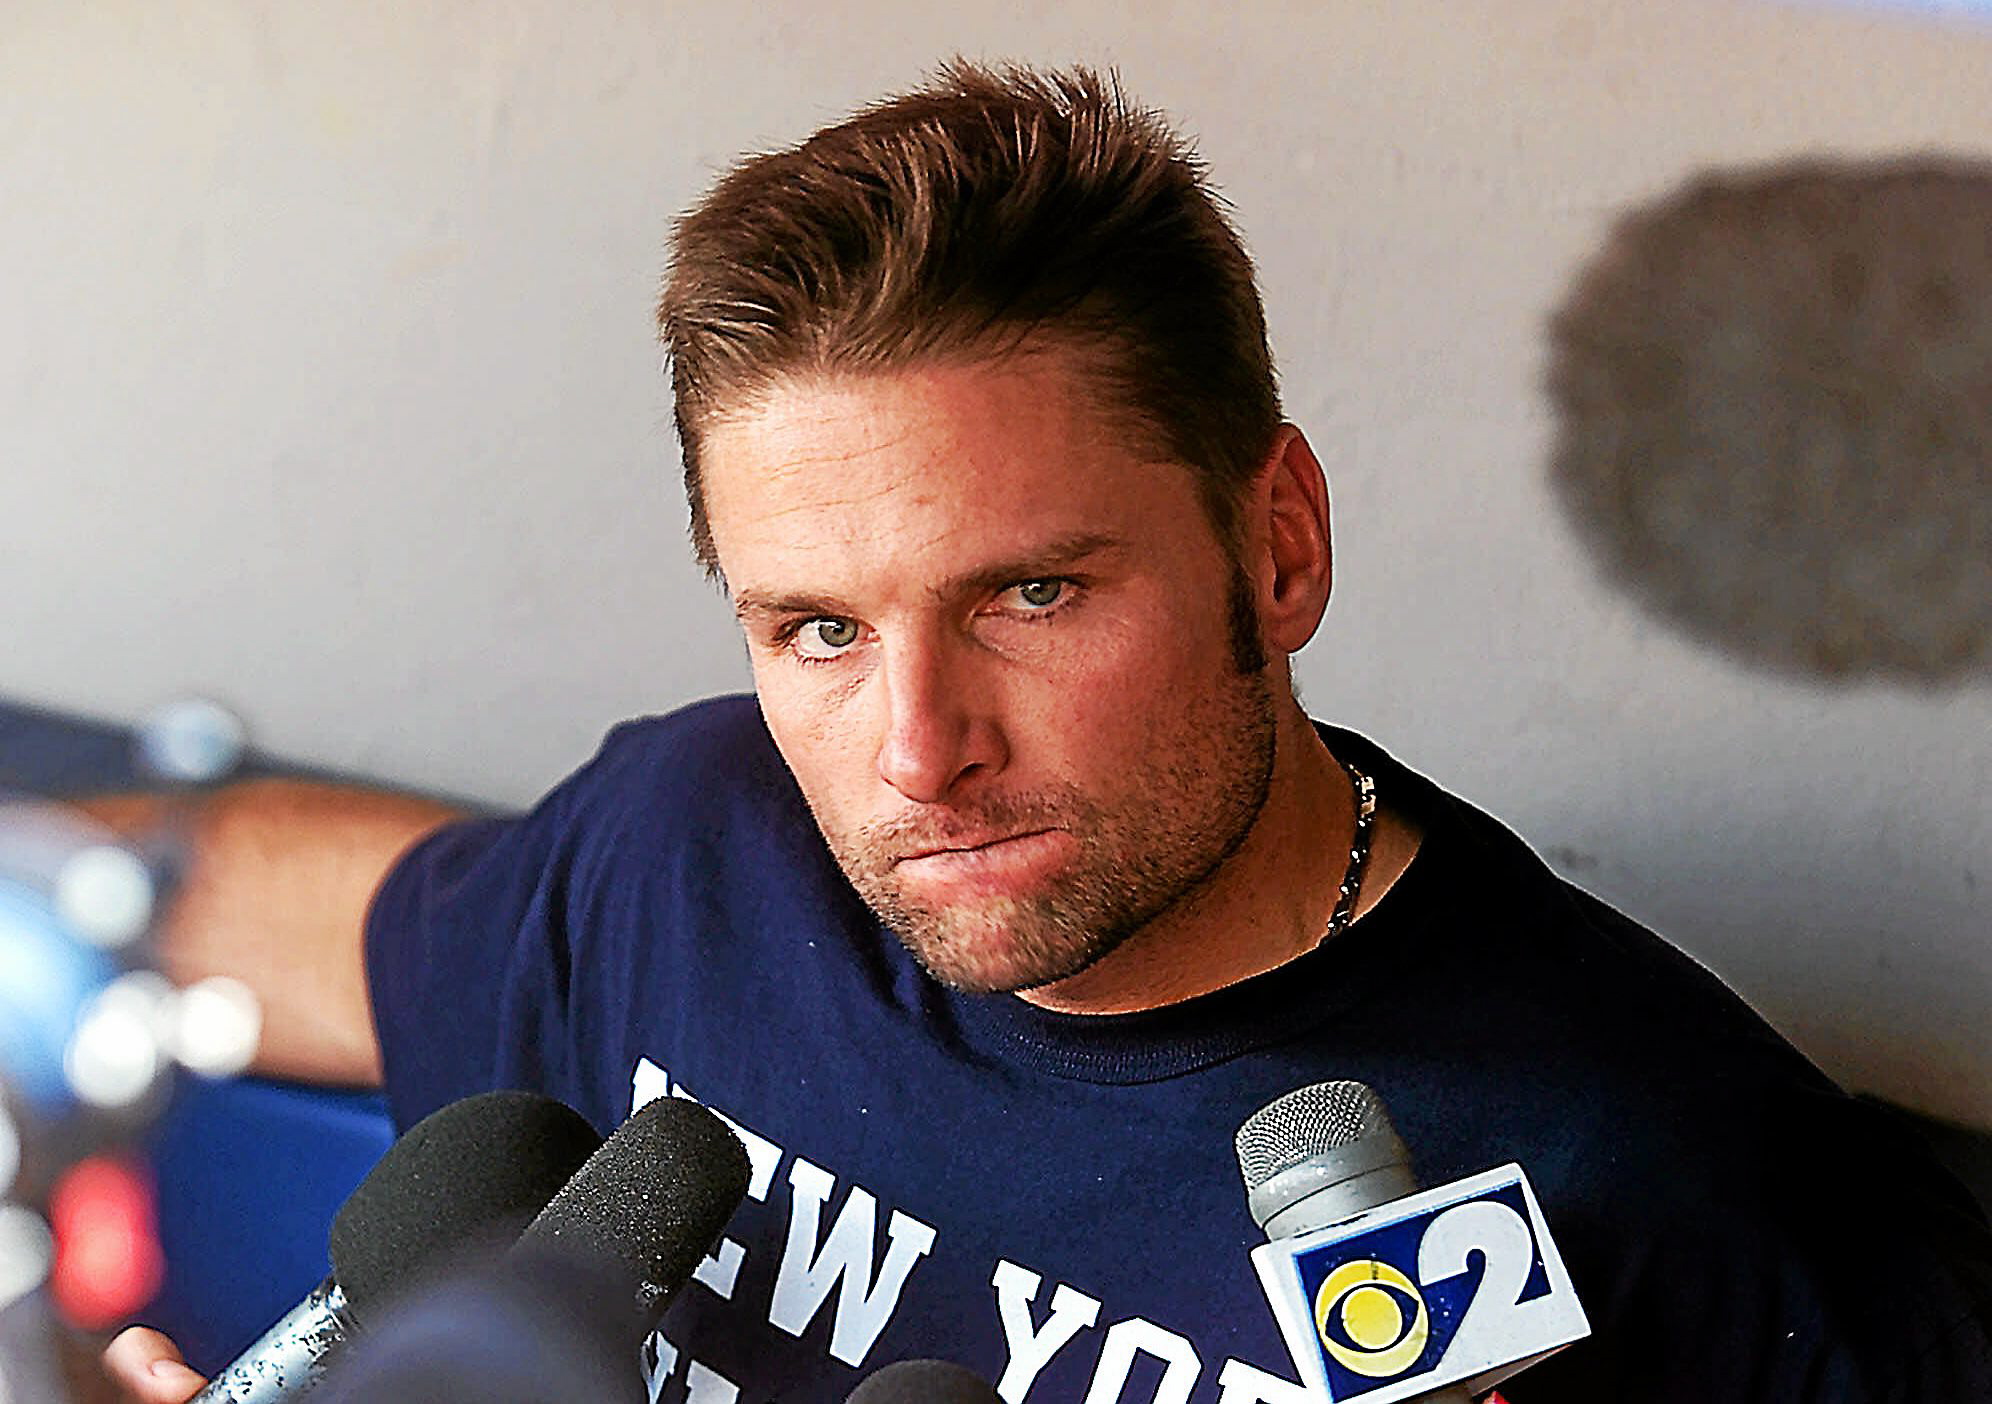 Former Yankee Chuck Knoblauch charged with assaulting ex-wife